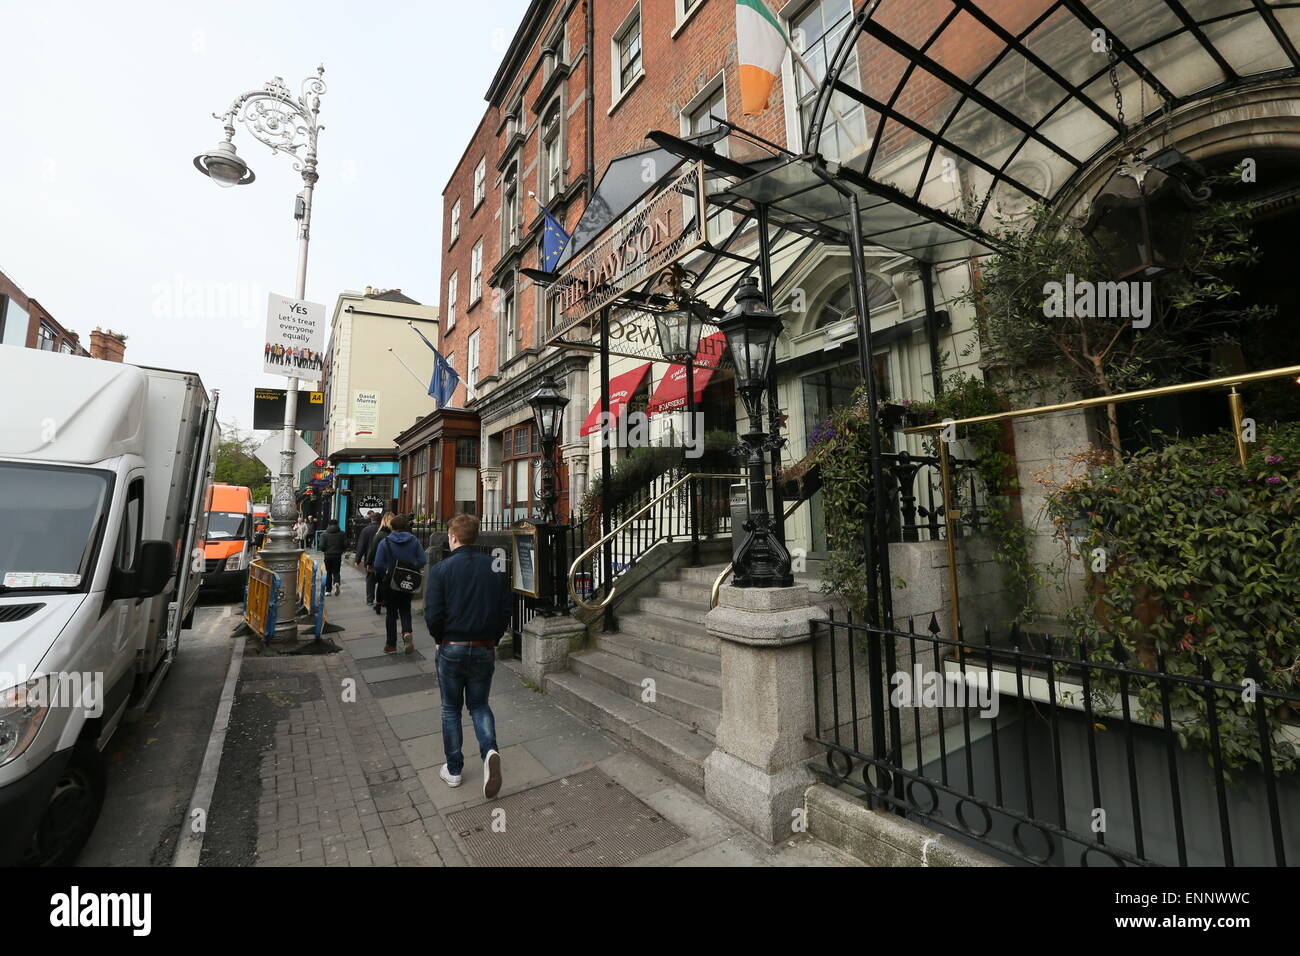 Image of the Dawson Hotel on Dawson Street in Dublin city centre. The hotel has been recently listed on the market with a guide  Stock Photo